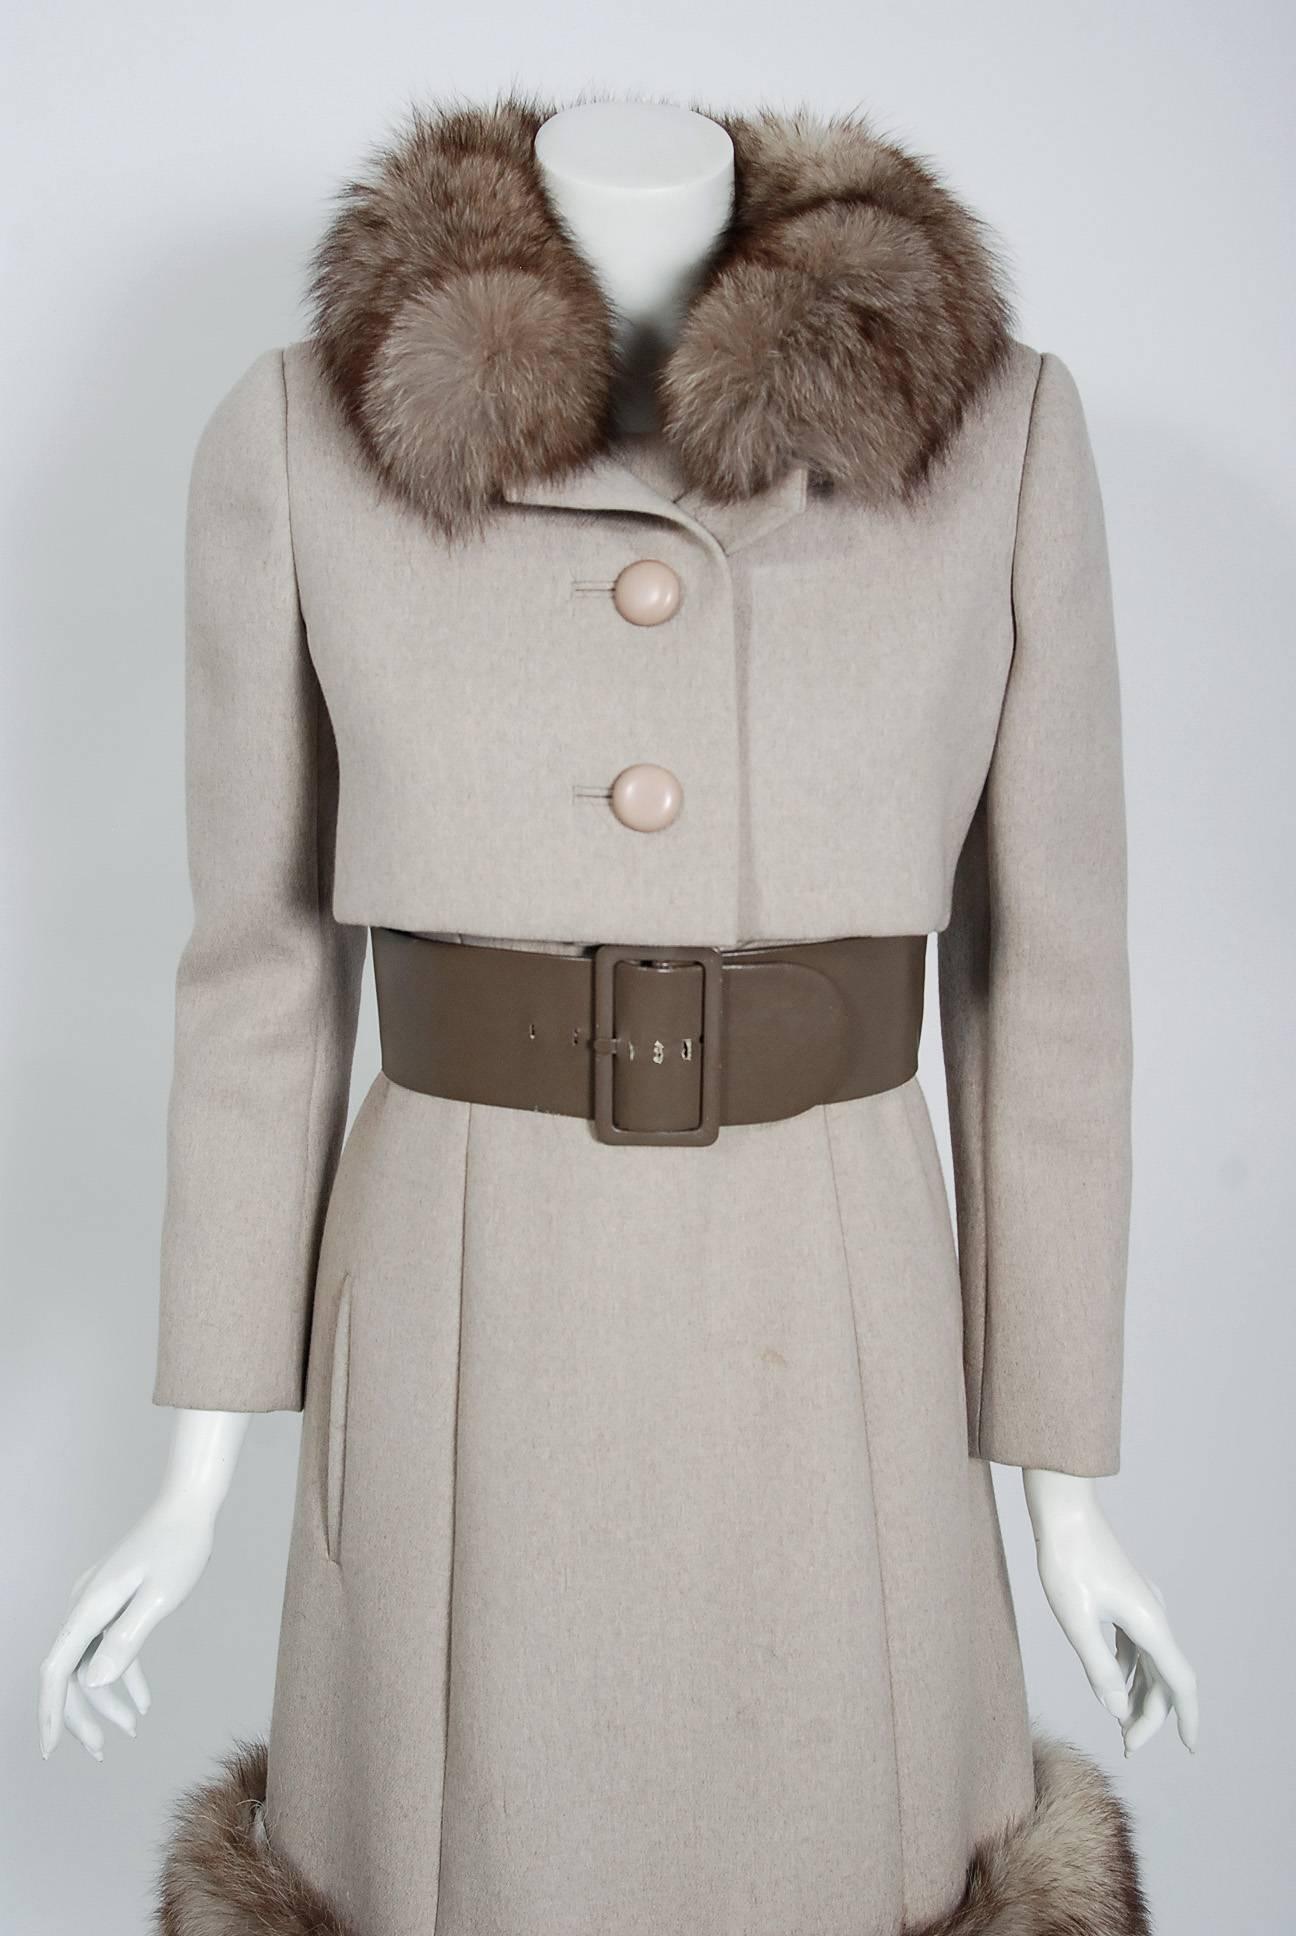 This timeless Norman Norell designer dress set, in the prettiest oatmeal wool and fox-fur combination, exemplifies his signature blend of couture-level quality with quintessentially American style. This gorgeous ensemble, dating back to his 1962